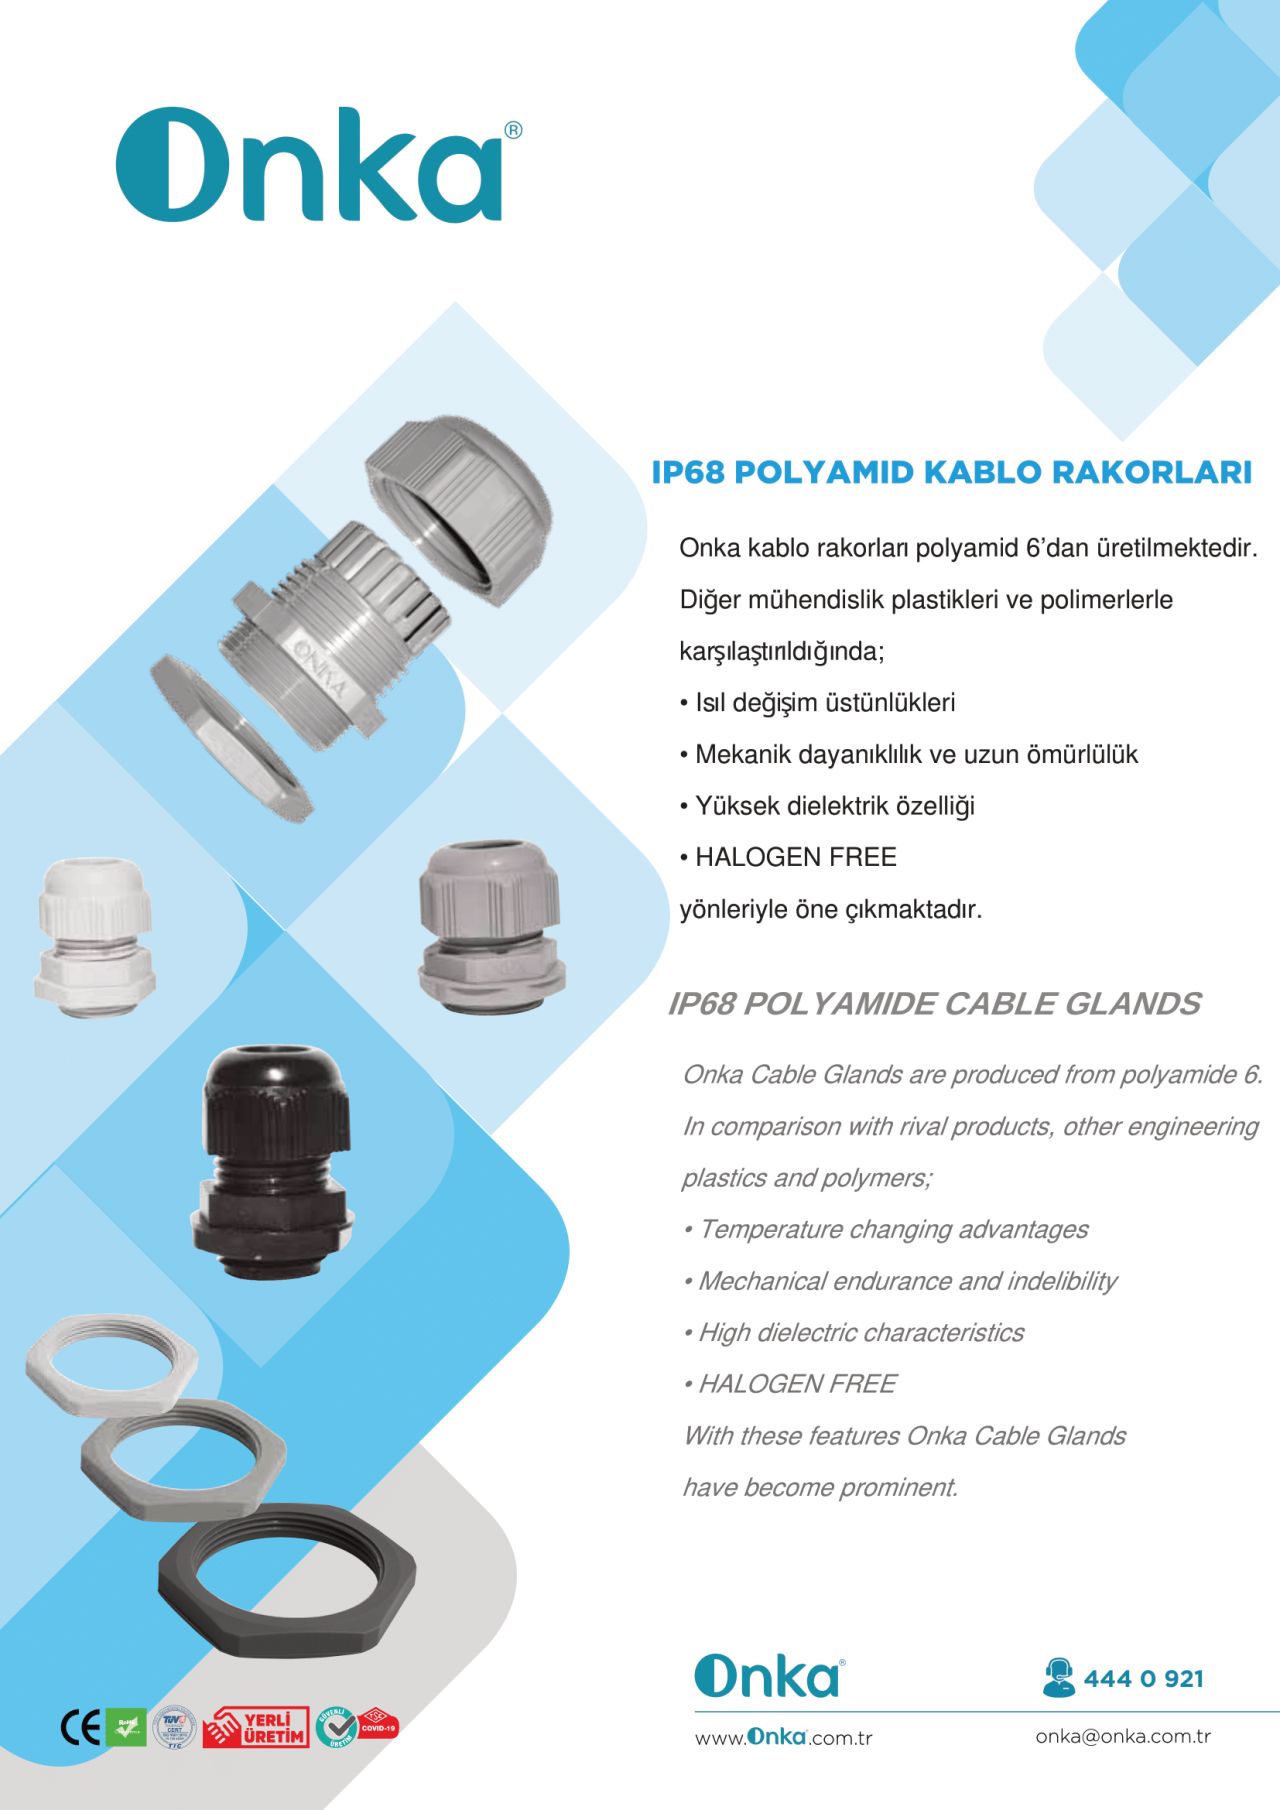 All in all trying not to be just another cable gland supplier in the